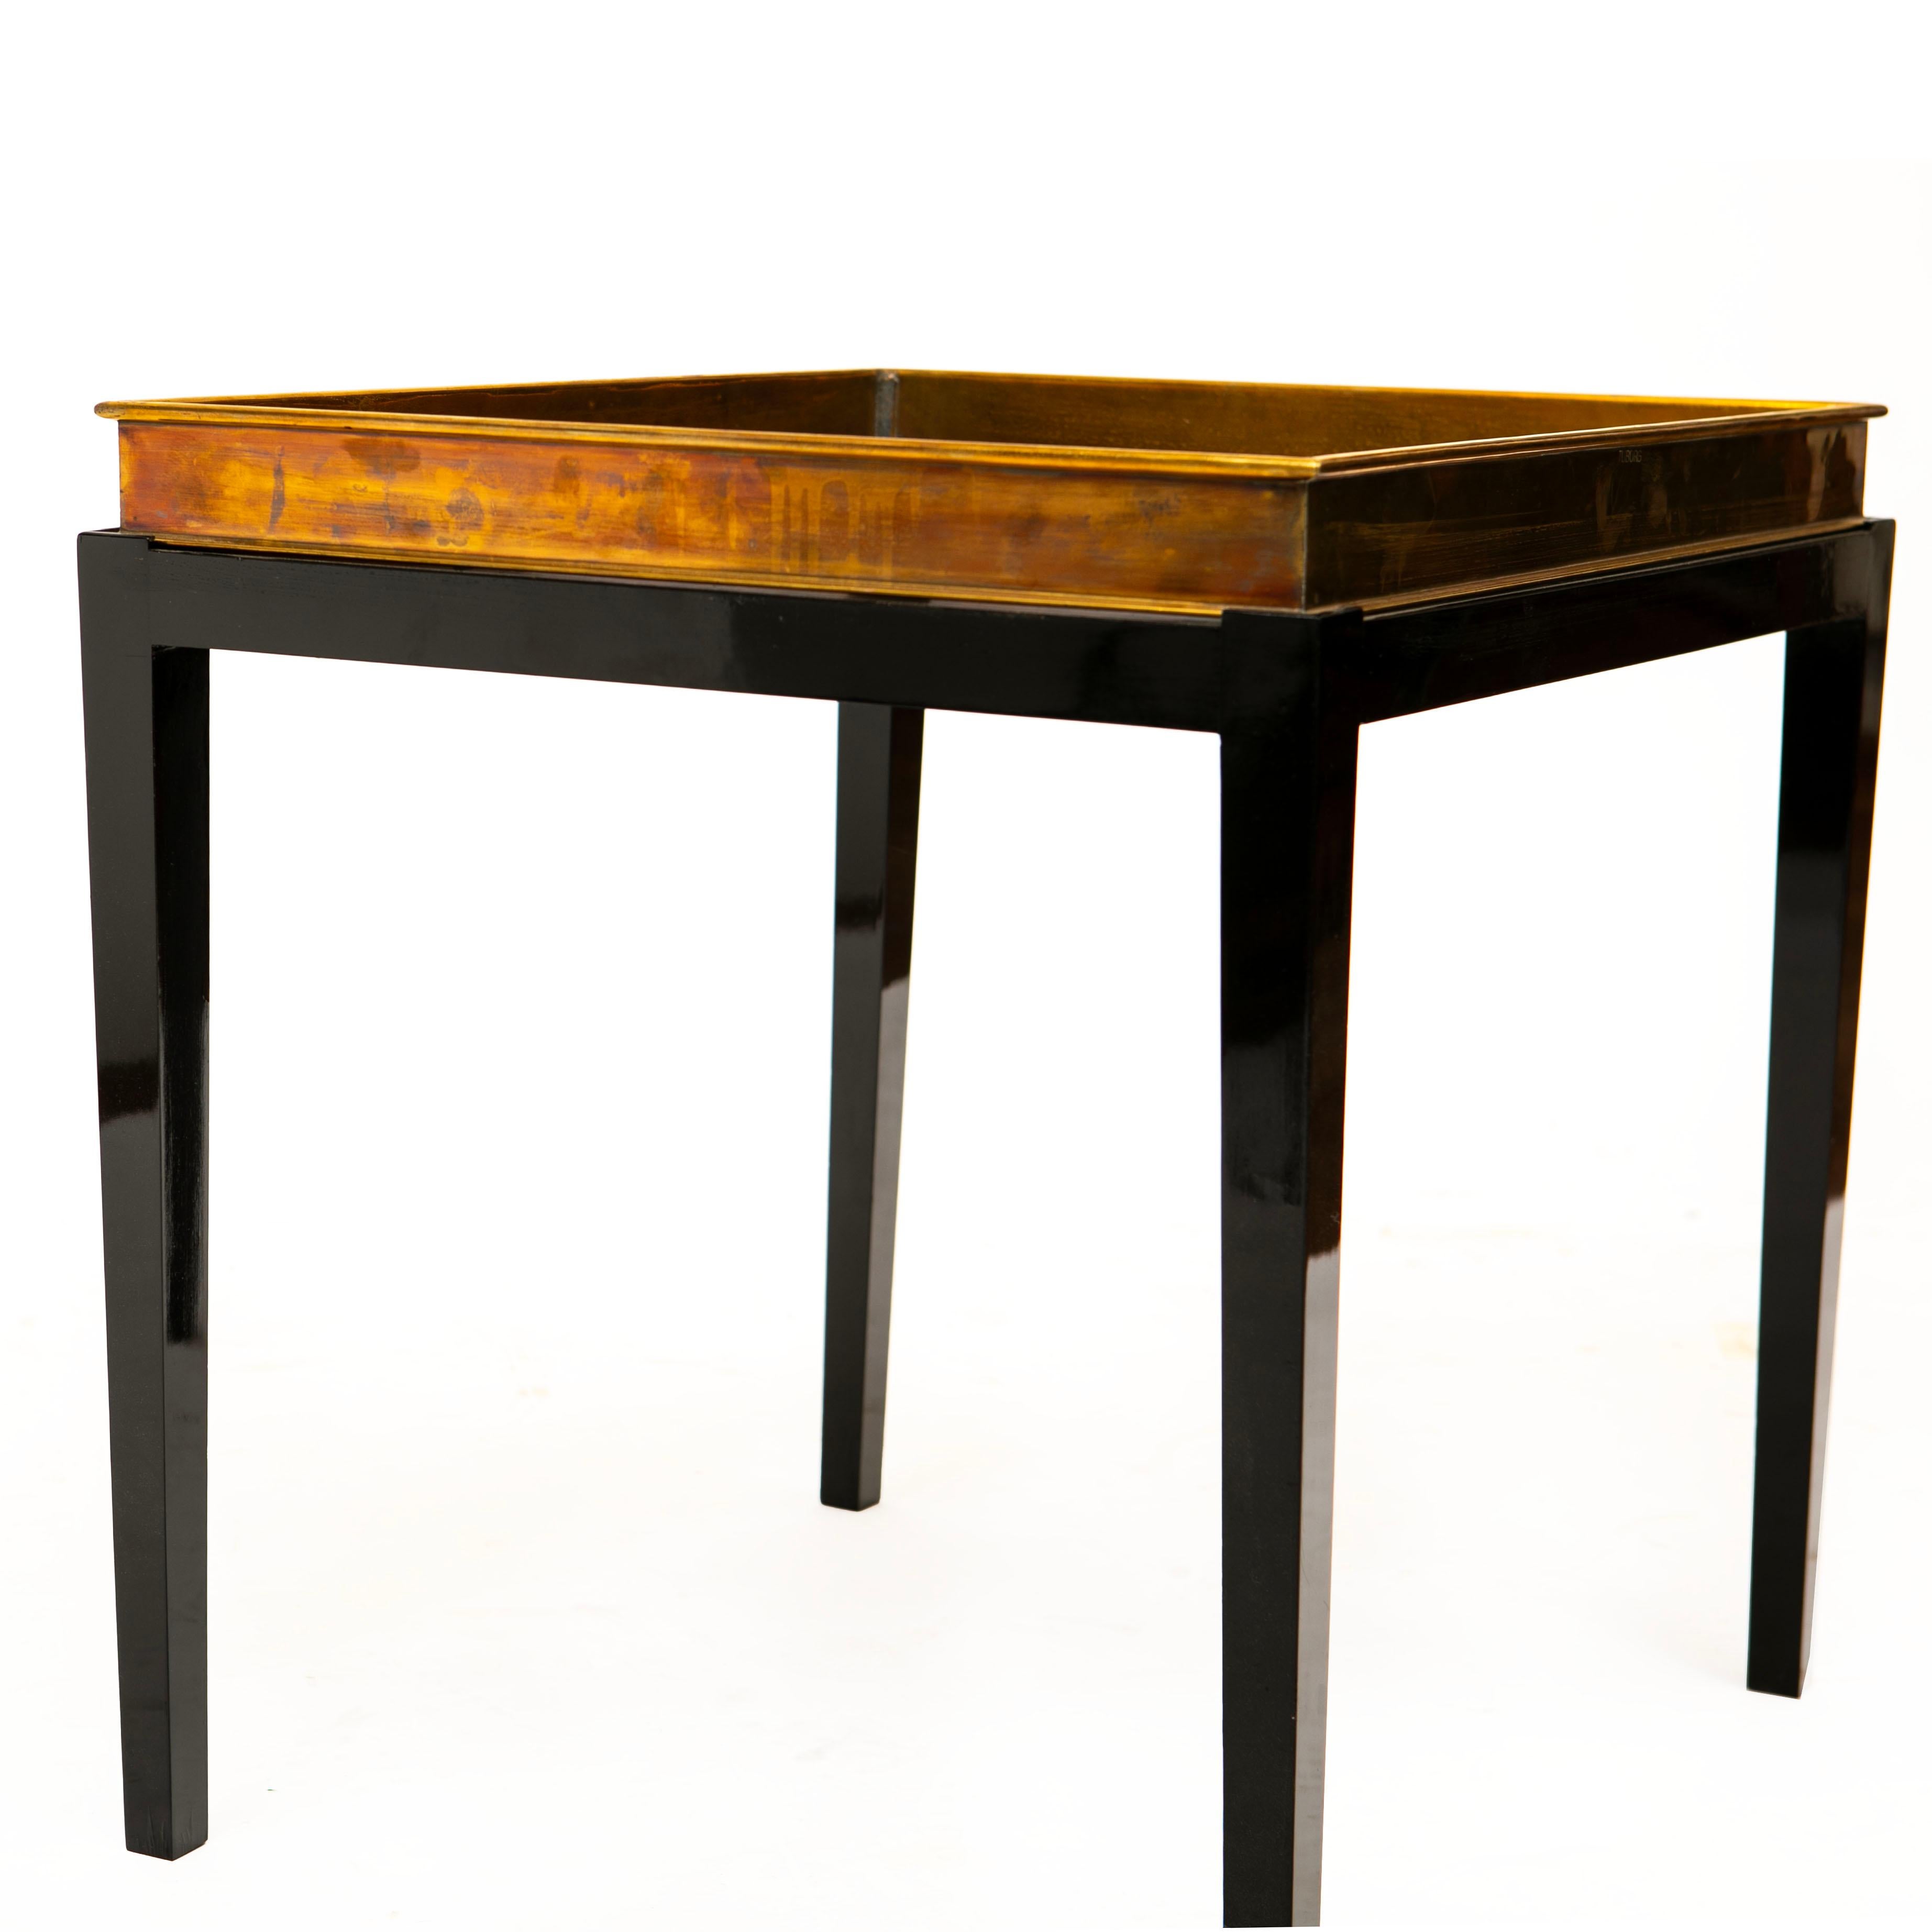 Tray Table Brass / Copper Black Polished Base 4